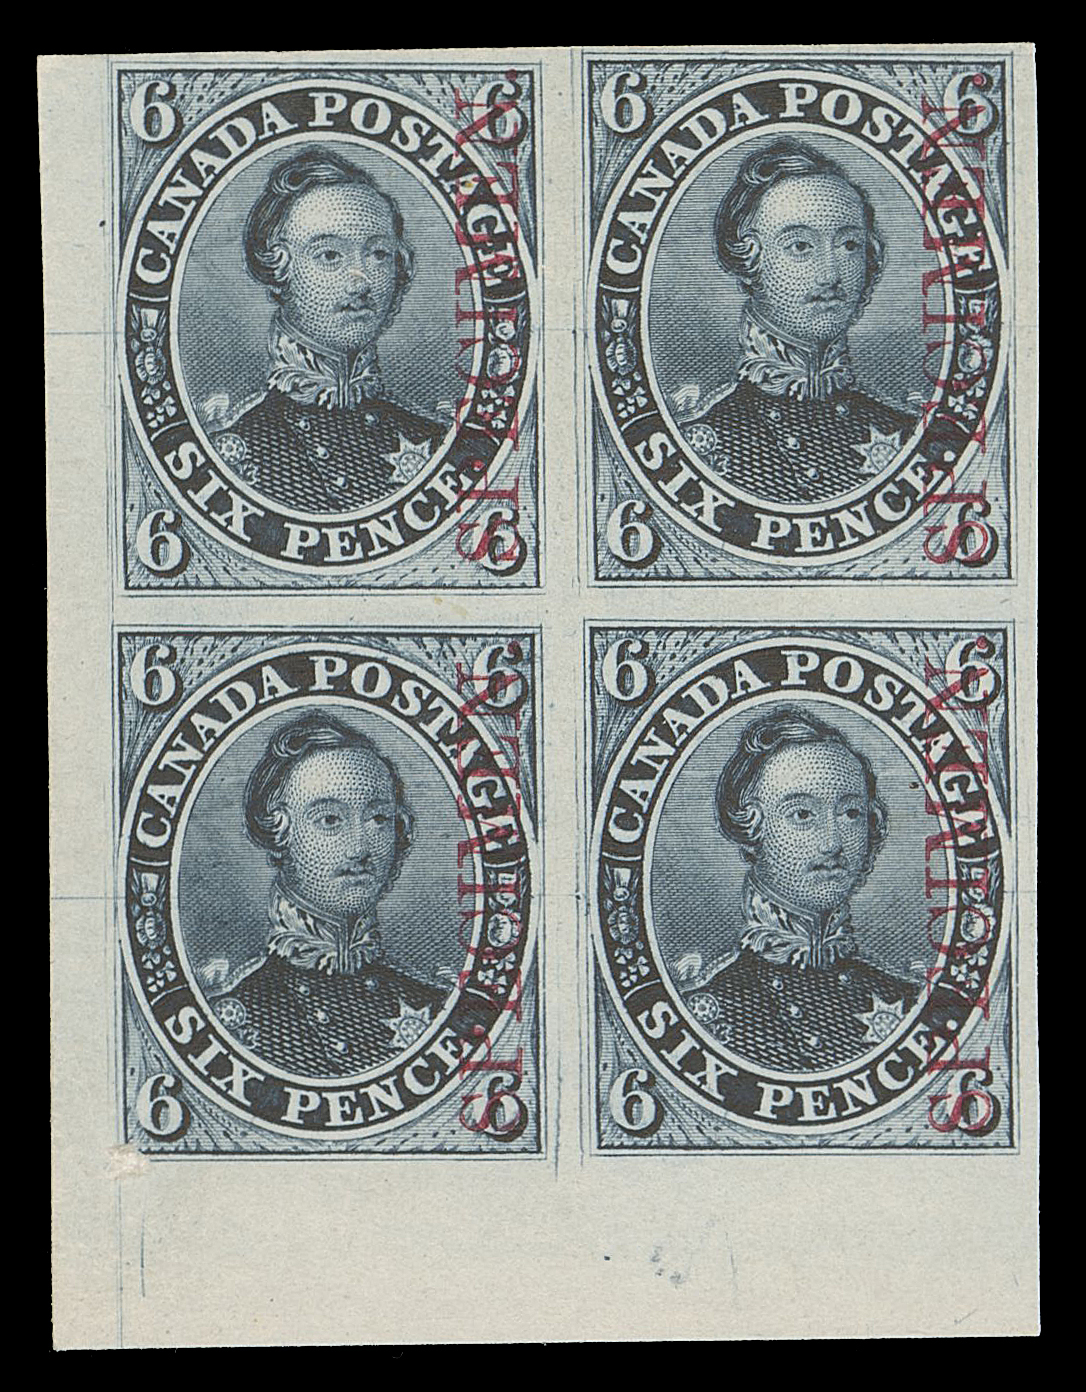 SIX PENCE AND TEN CENTS  2TCxi,A corner margin trial colour plate proof block printed in grey blue on card mounted india paper, vertical SPECIMEN overprint in carmine; engraver